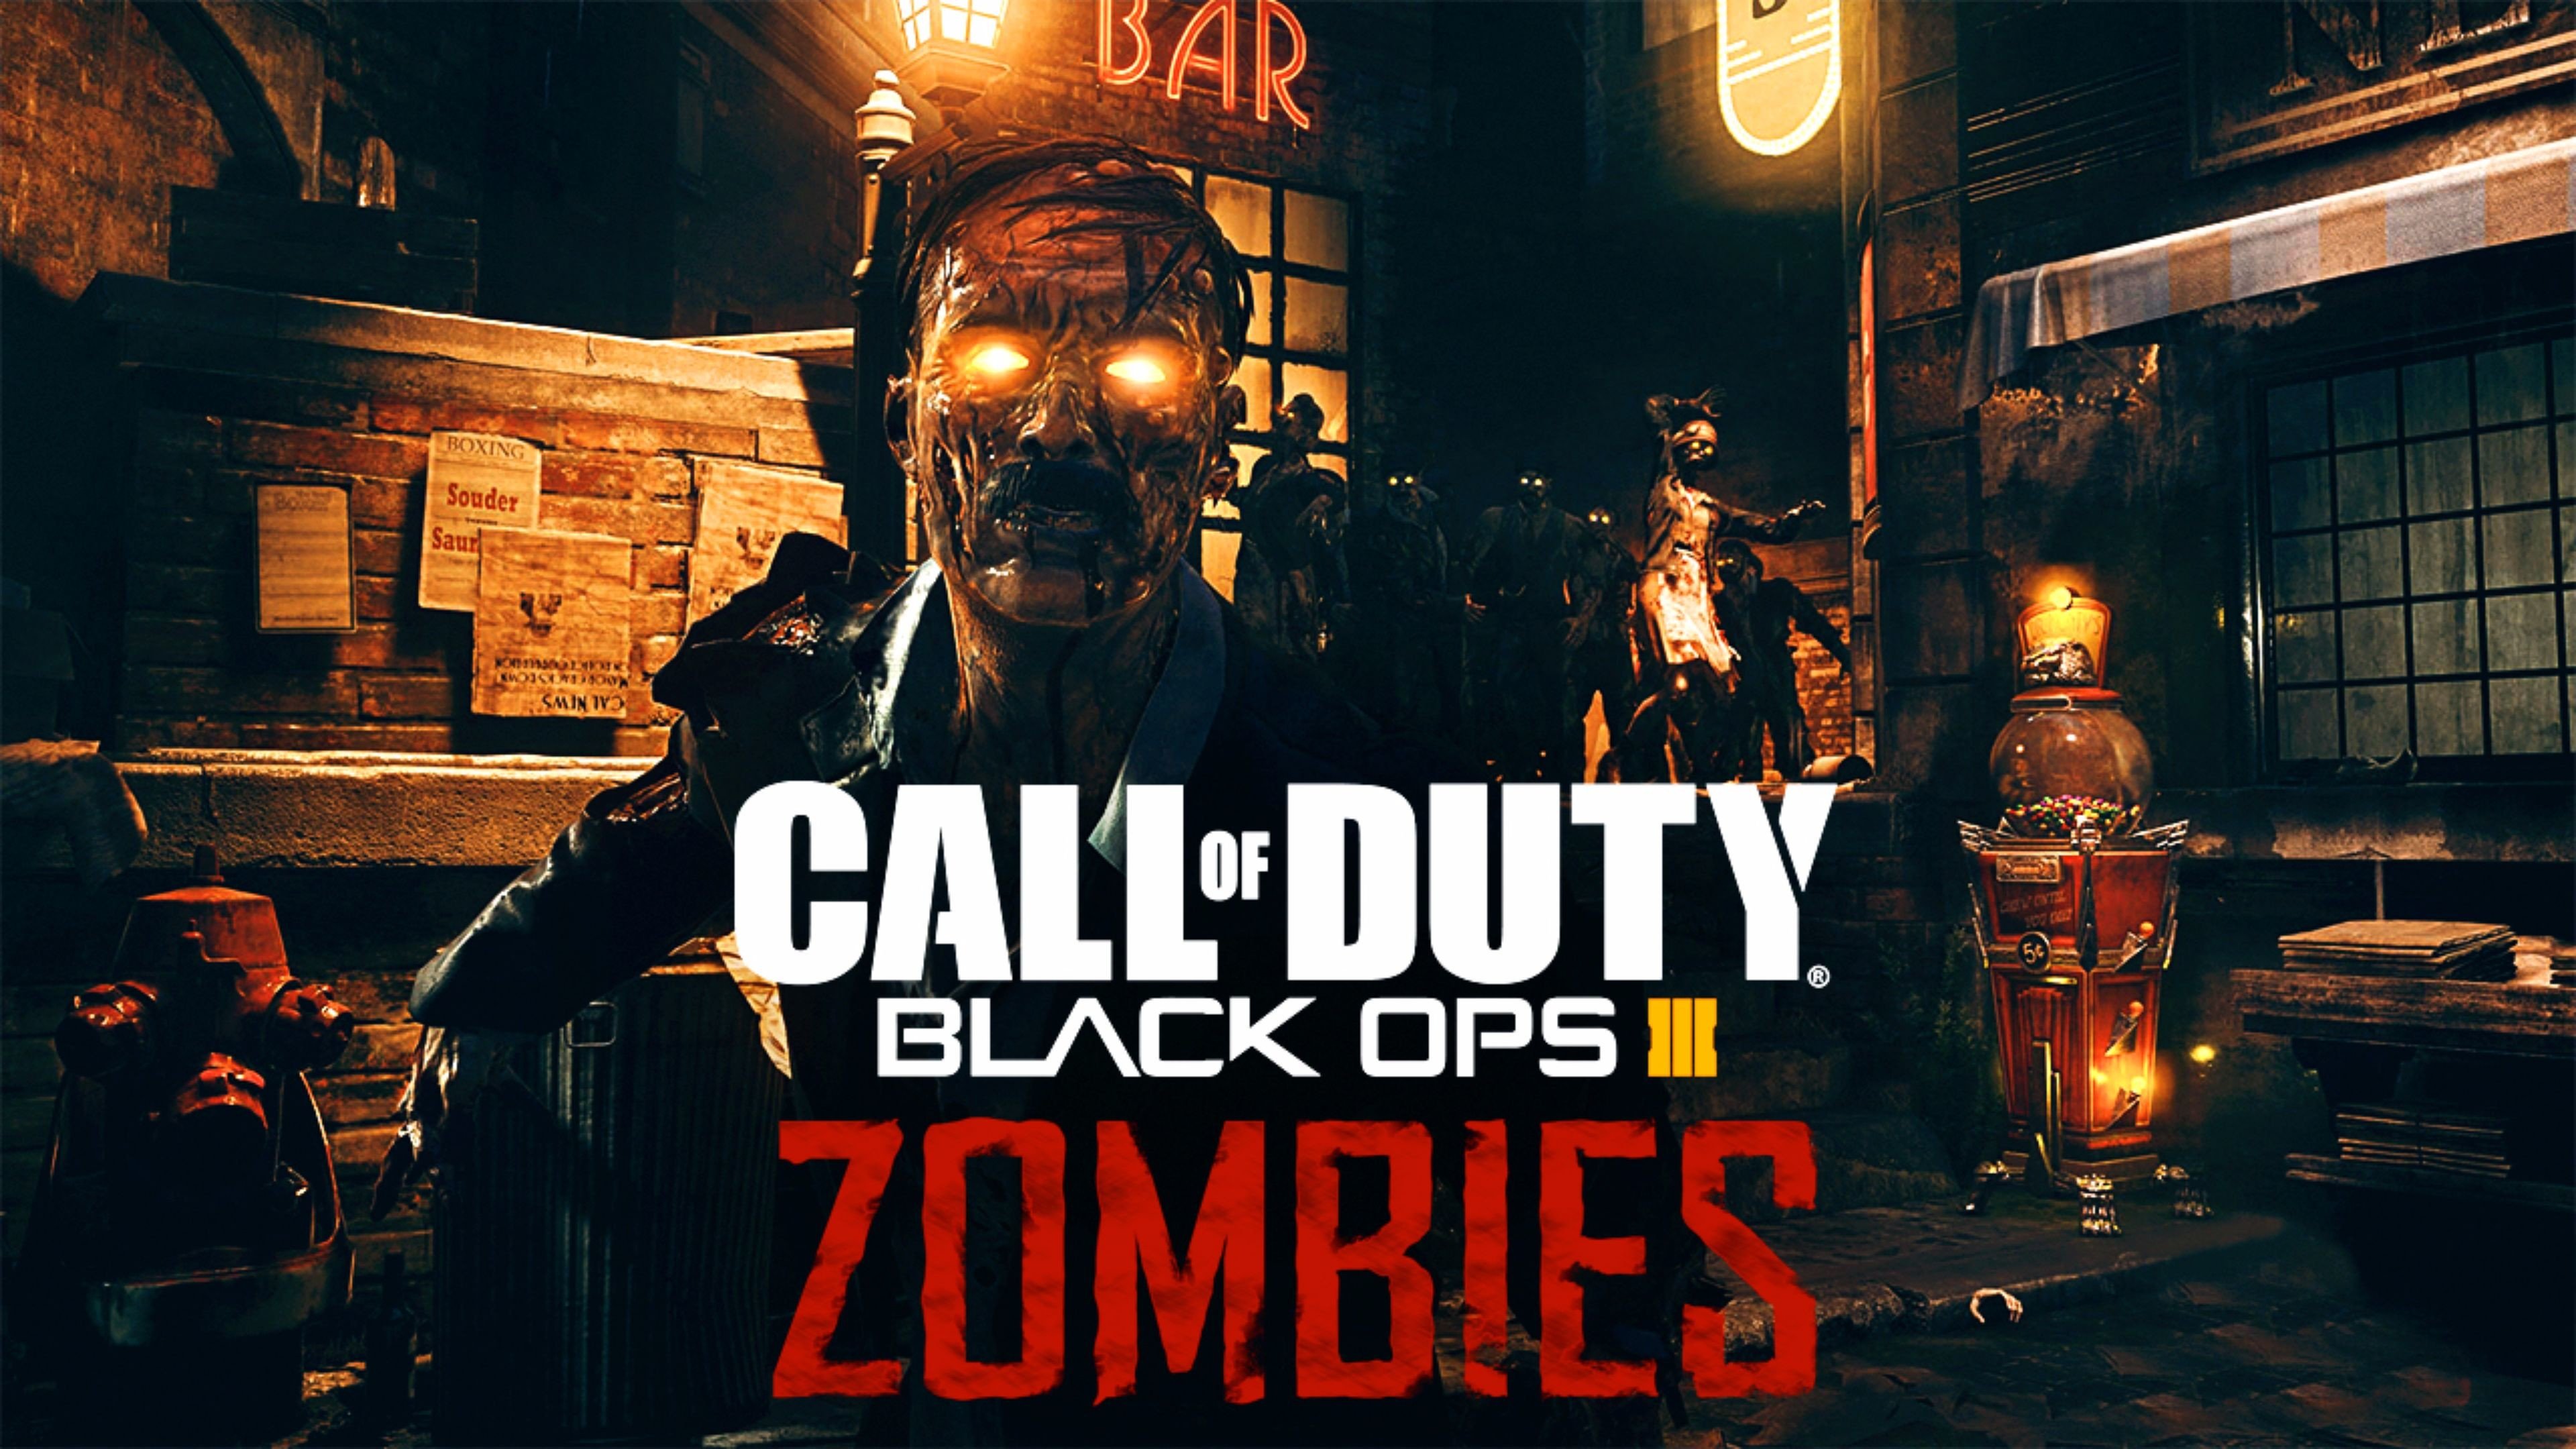 Cod Zombies Wallpapers 71 images